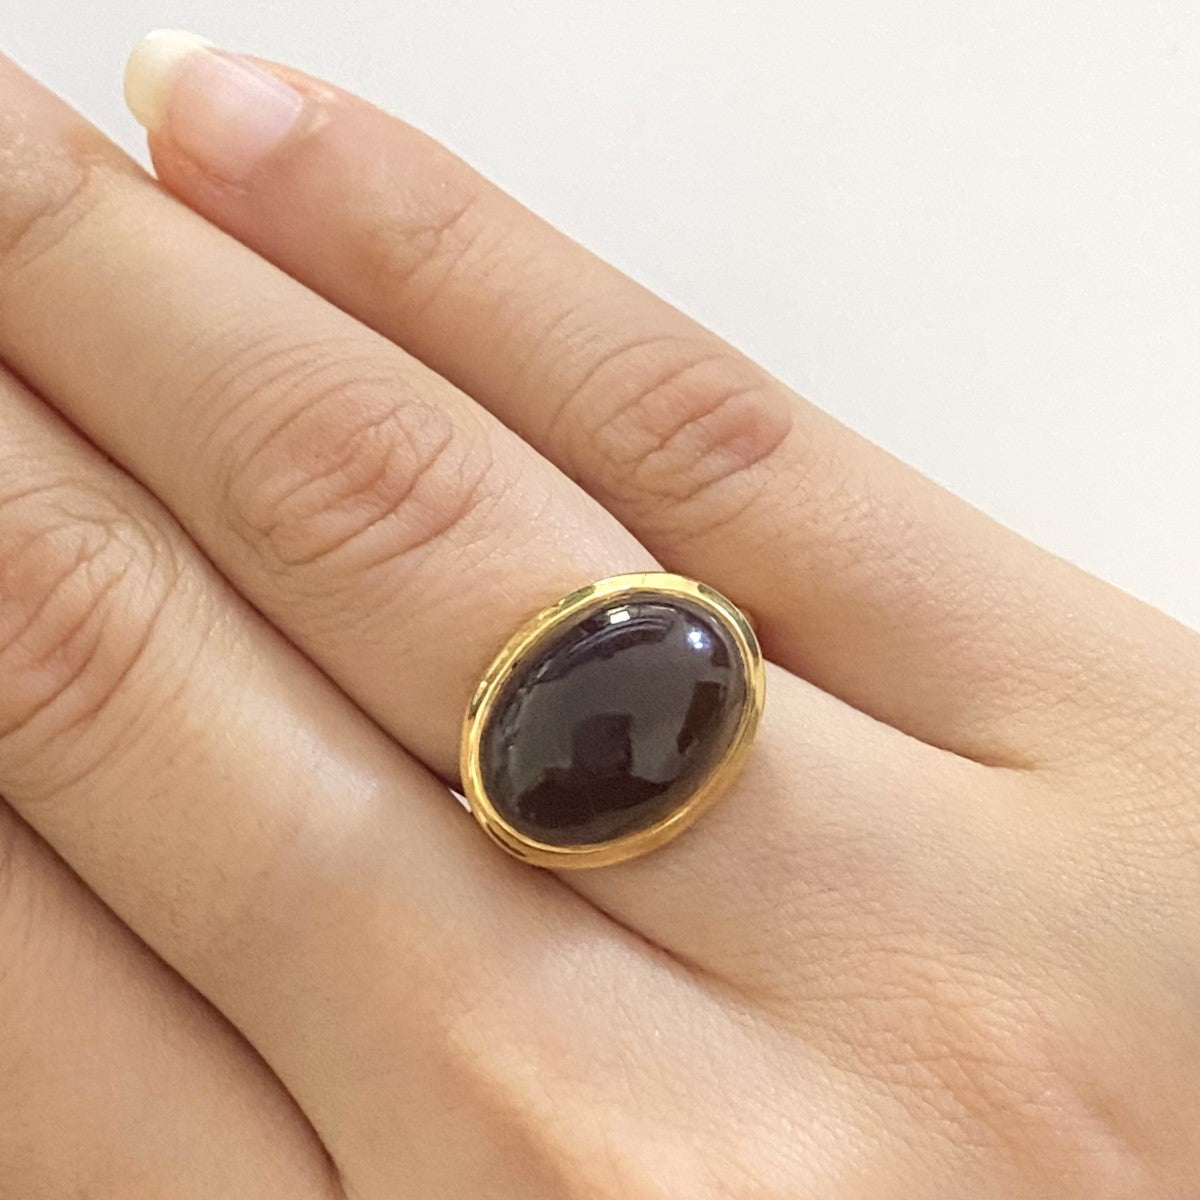 Cabochon Oval Cut Natural Gemstone Gold Plated Sterling Silver Ring - Smoky Quartz